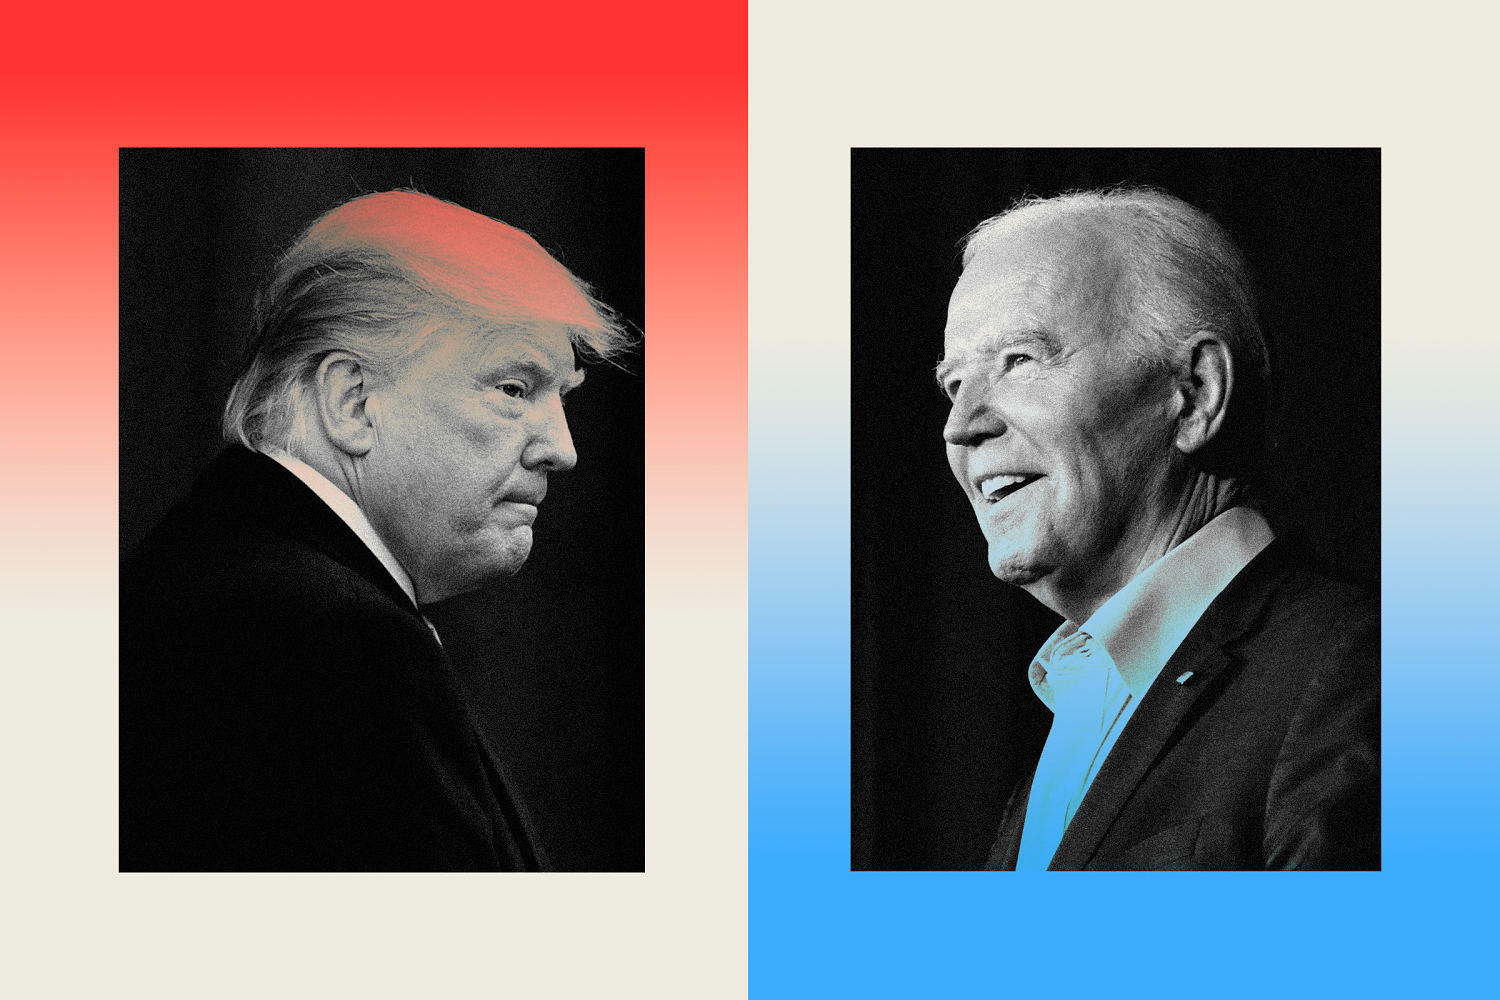 Biden and Trump: Compare where they stand on key issues